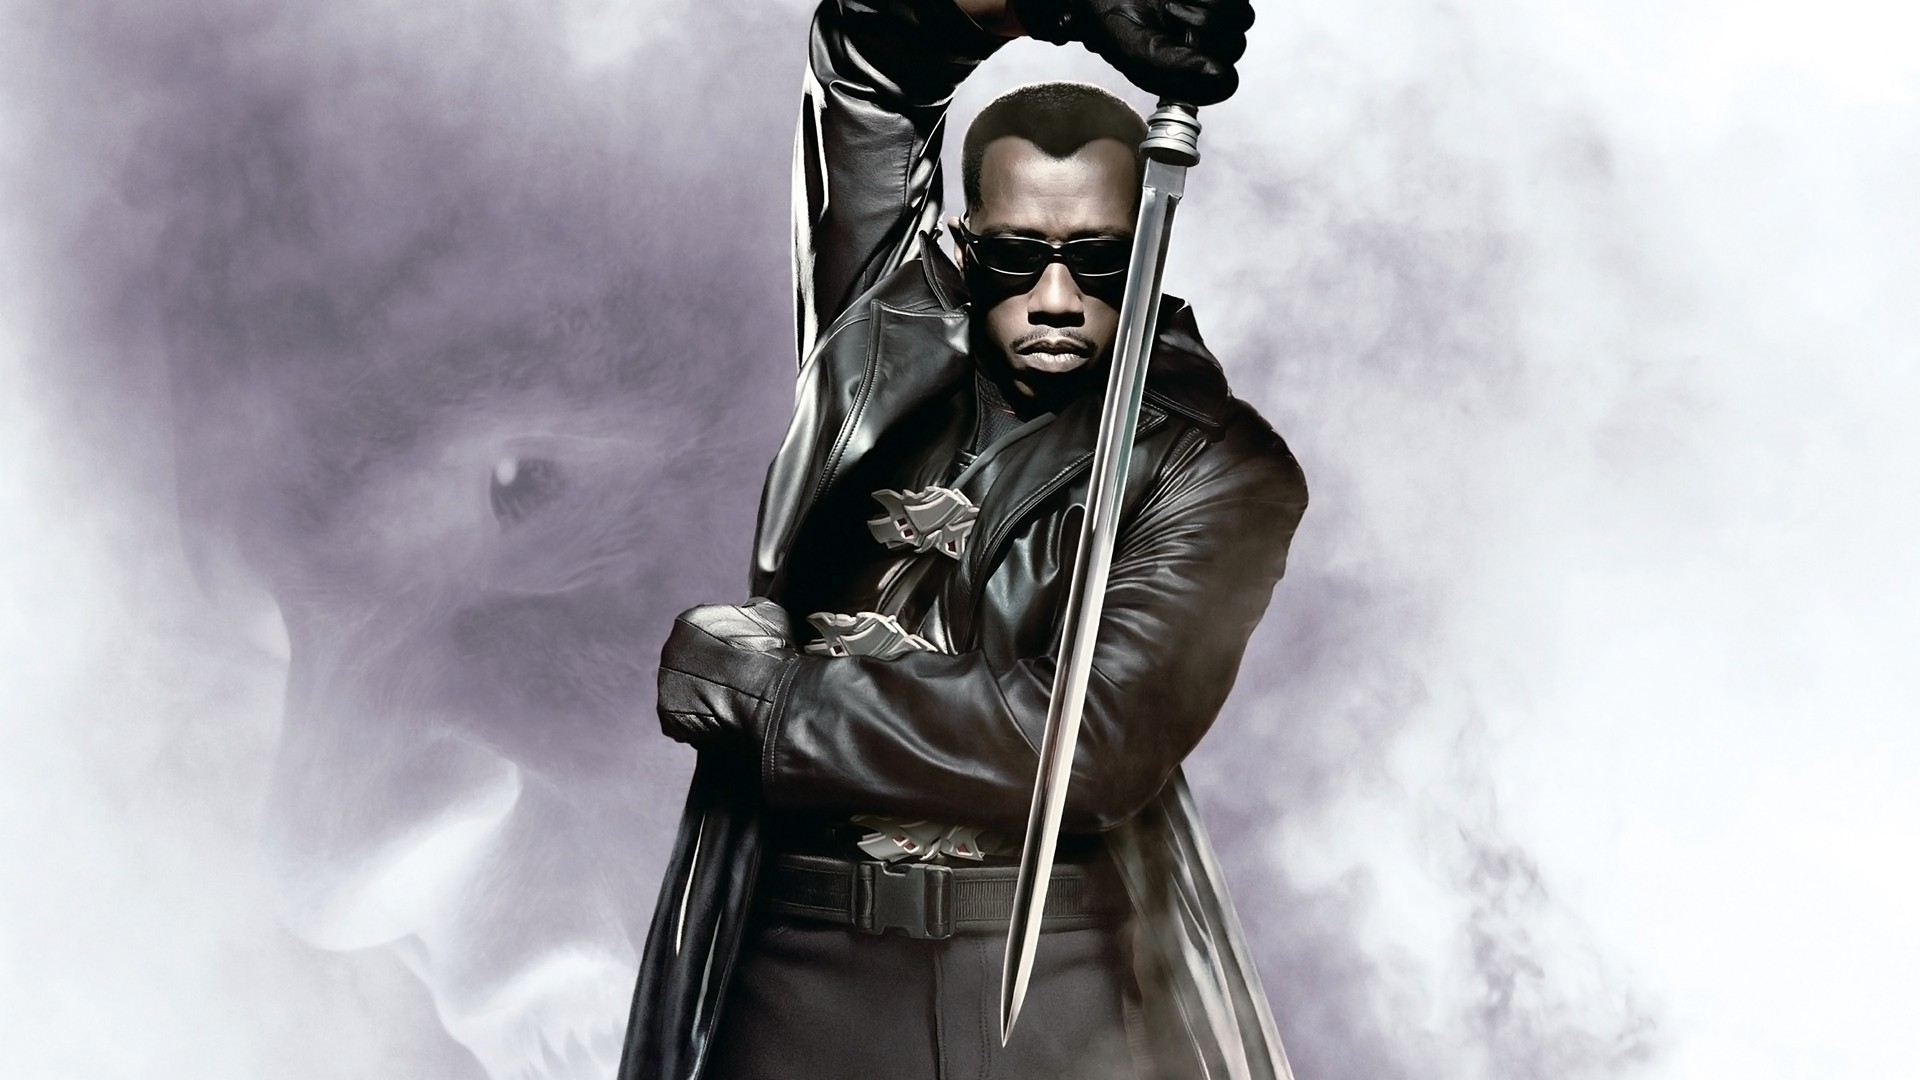 Kevin Feige Says Blade Will Be In The MCU “Someday”